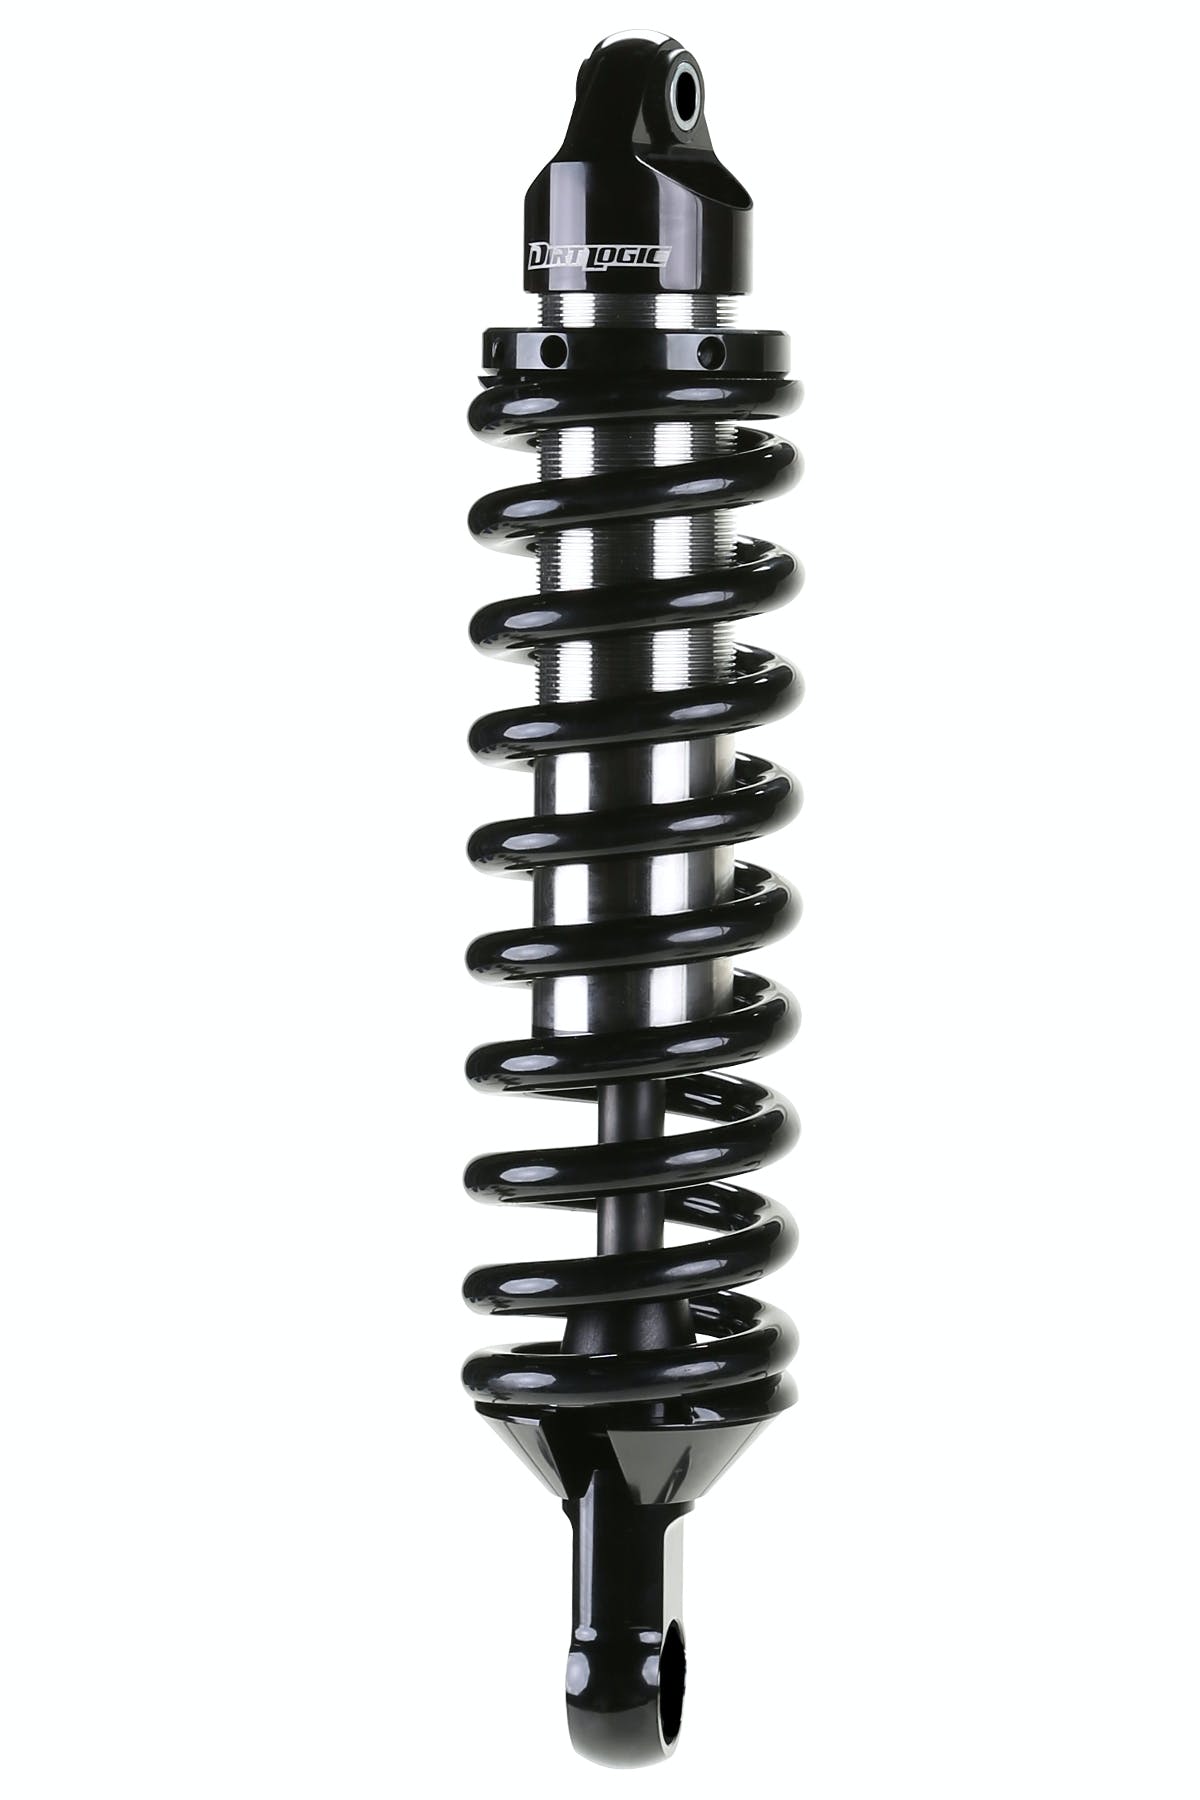 Fabtech FTS22252 Dirt Logic 2.5 Stainless Steel Coilover Shock Absorber